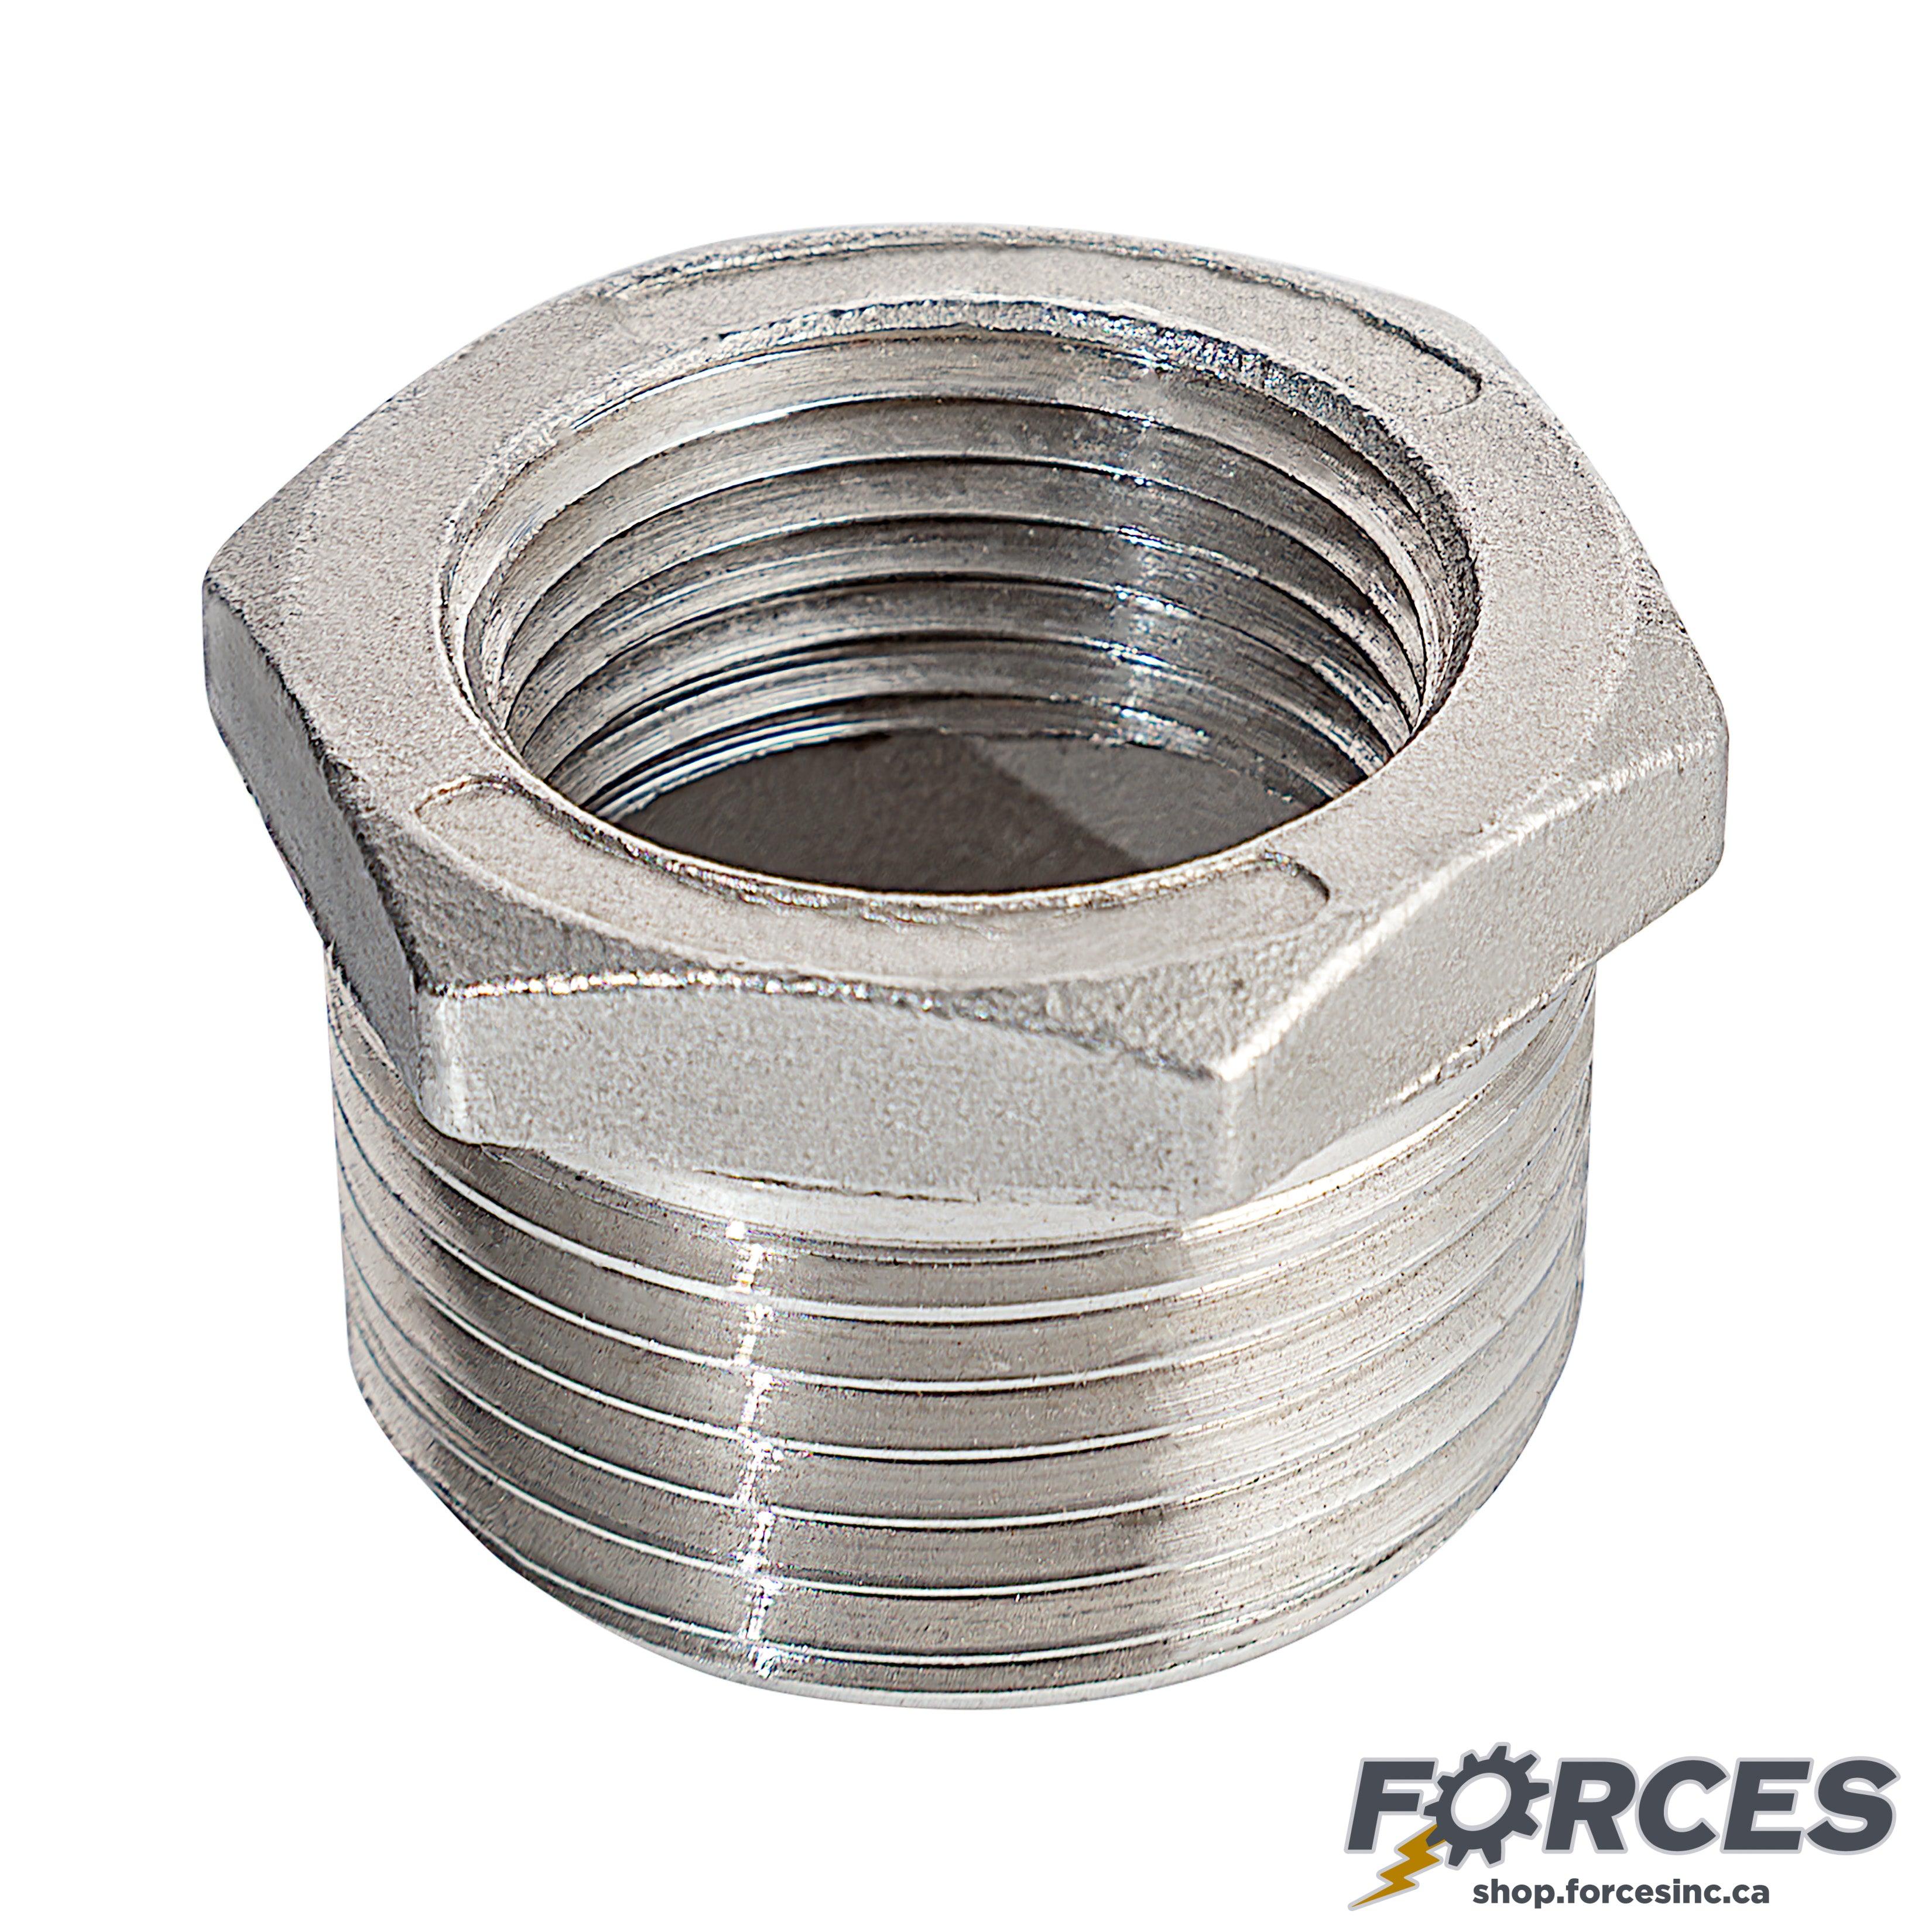 1-1/4" (M) x 1" (F) Reducing Hex Bushing NPT #150 - Stainless Steel 316 - Forces Inc